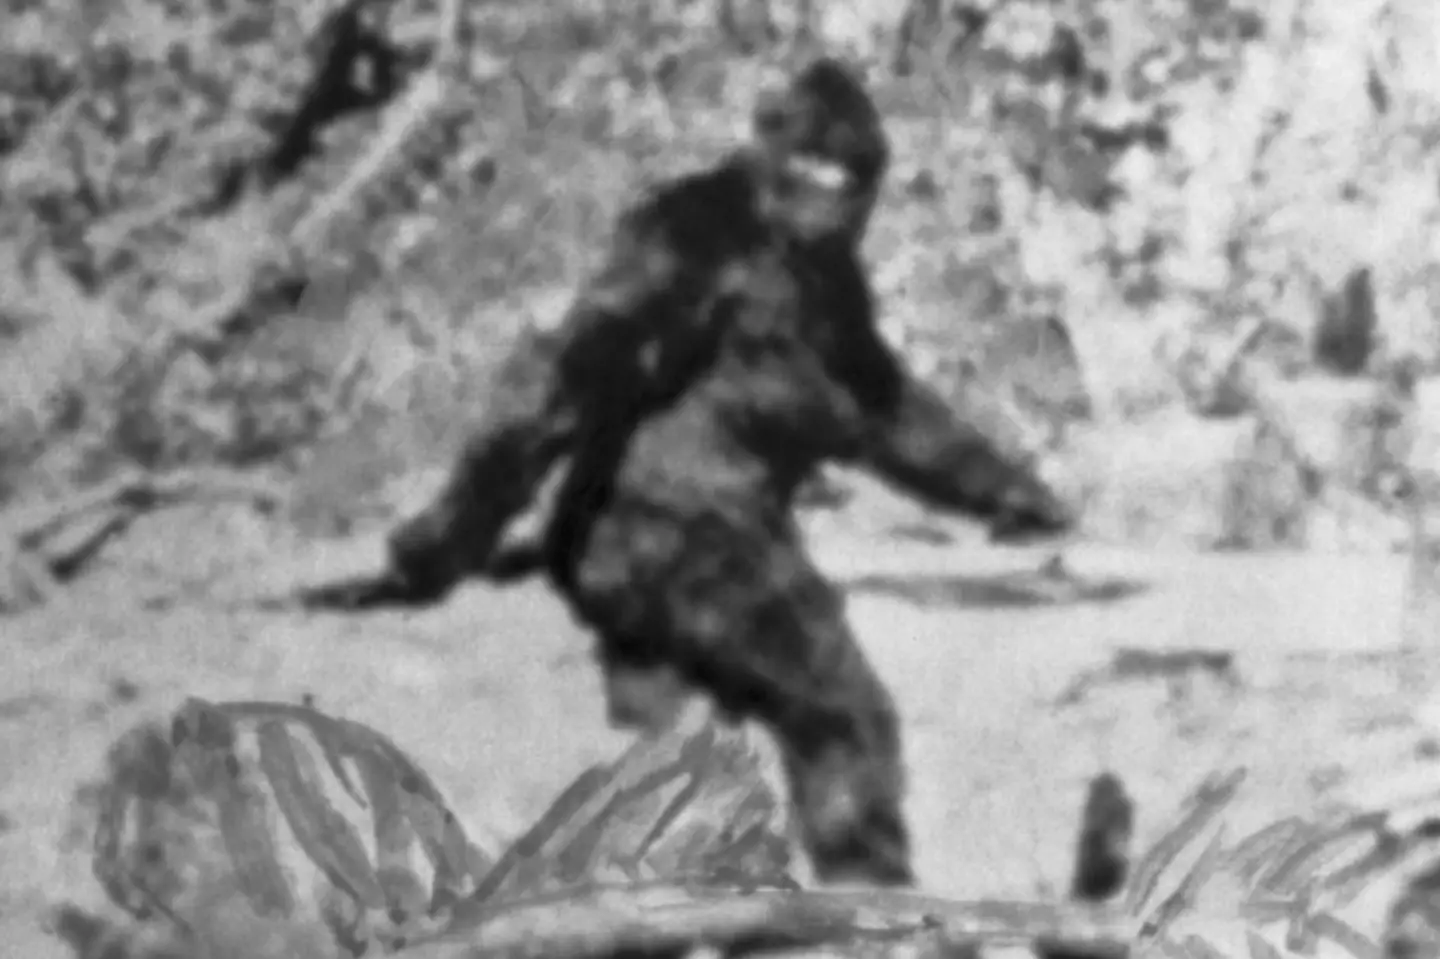 Bigfoot 'sightings' have occurred a number of times over the years.